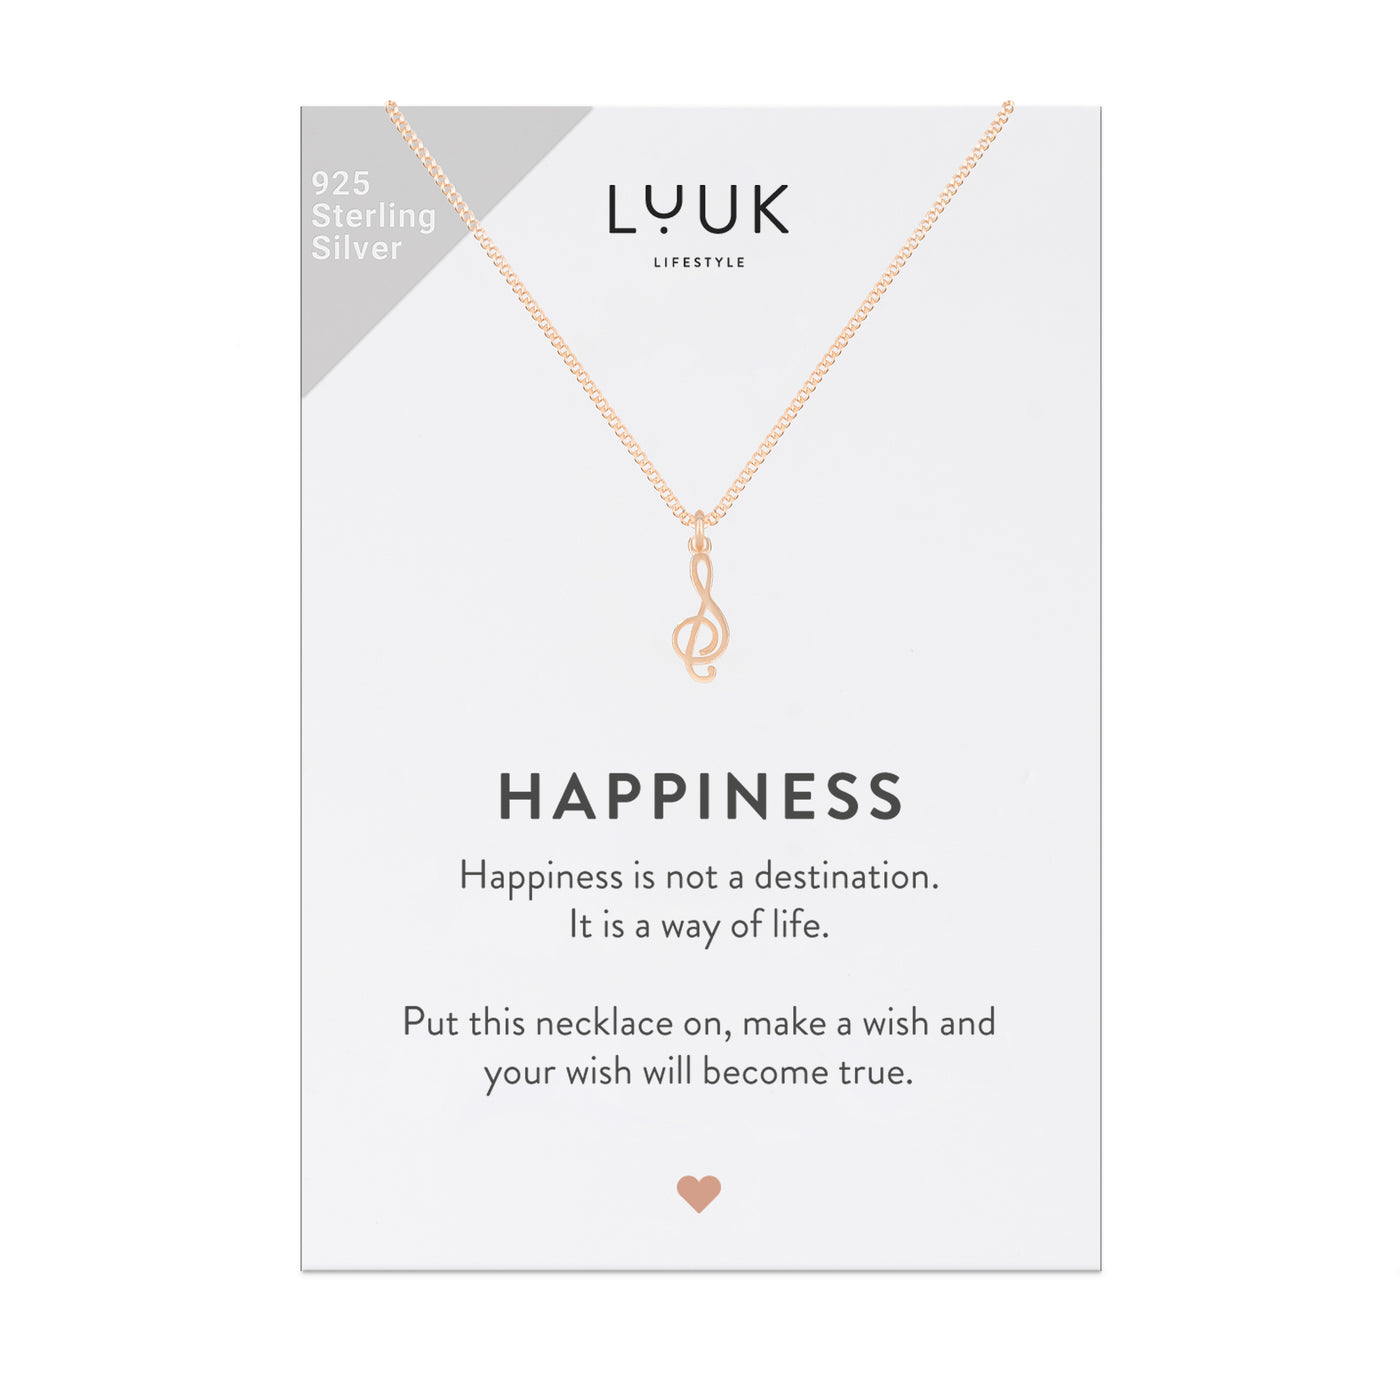 Sterling silver necklace with clef pendant and Happiness greeting card